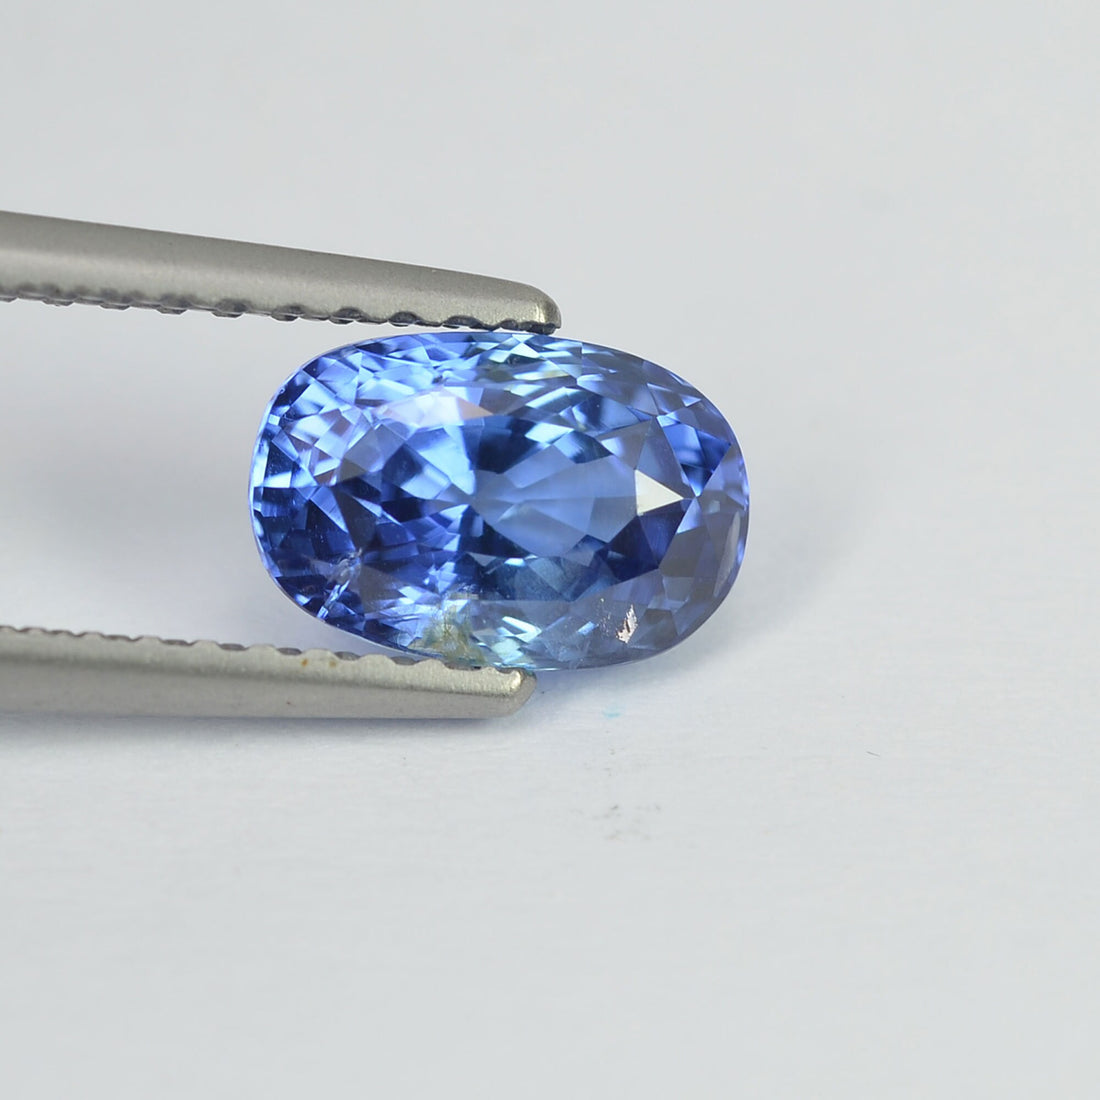 1.60 cts Unheated Natural Blue Sapphire Loose Gemstone Oval Cut Certified